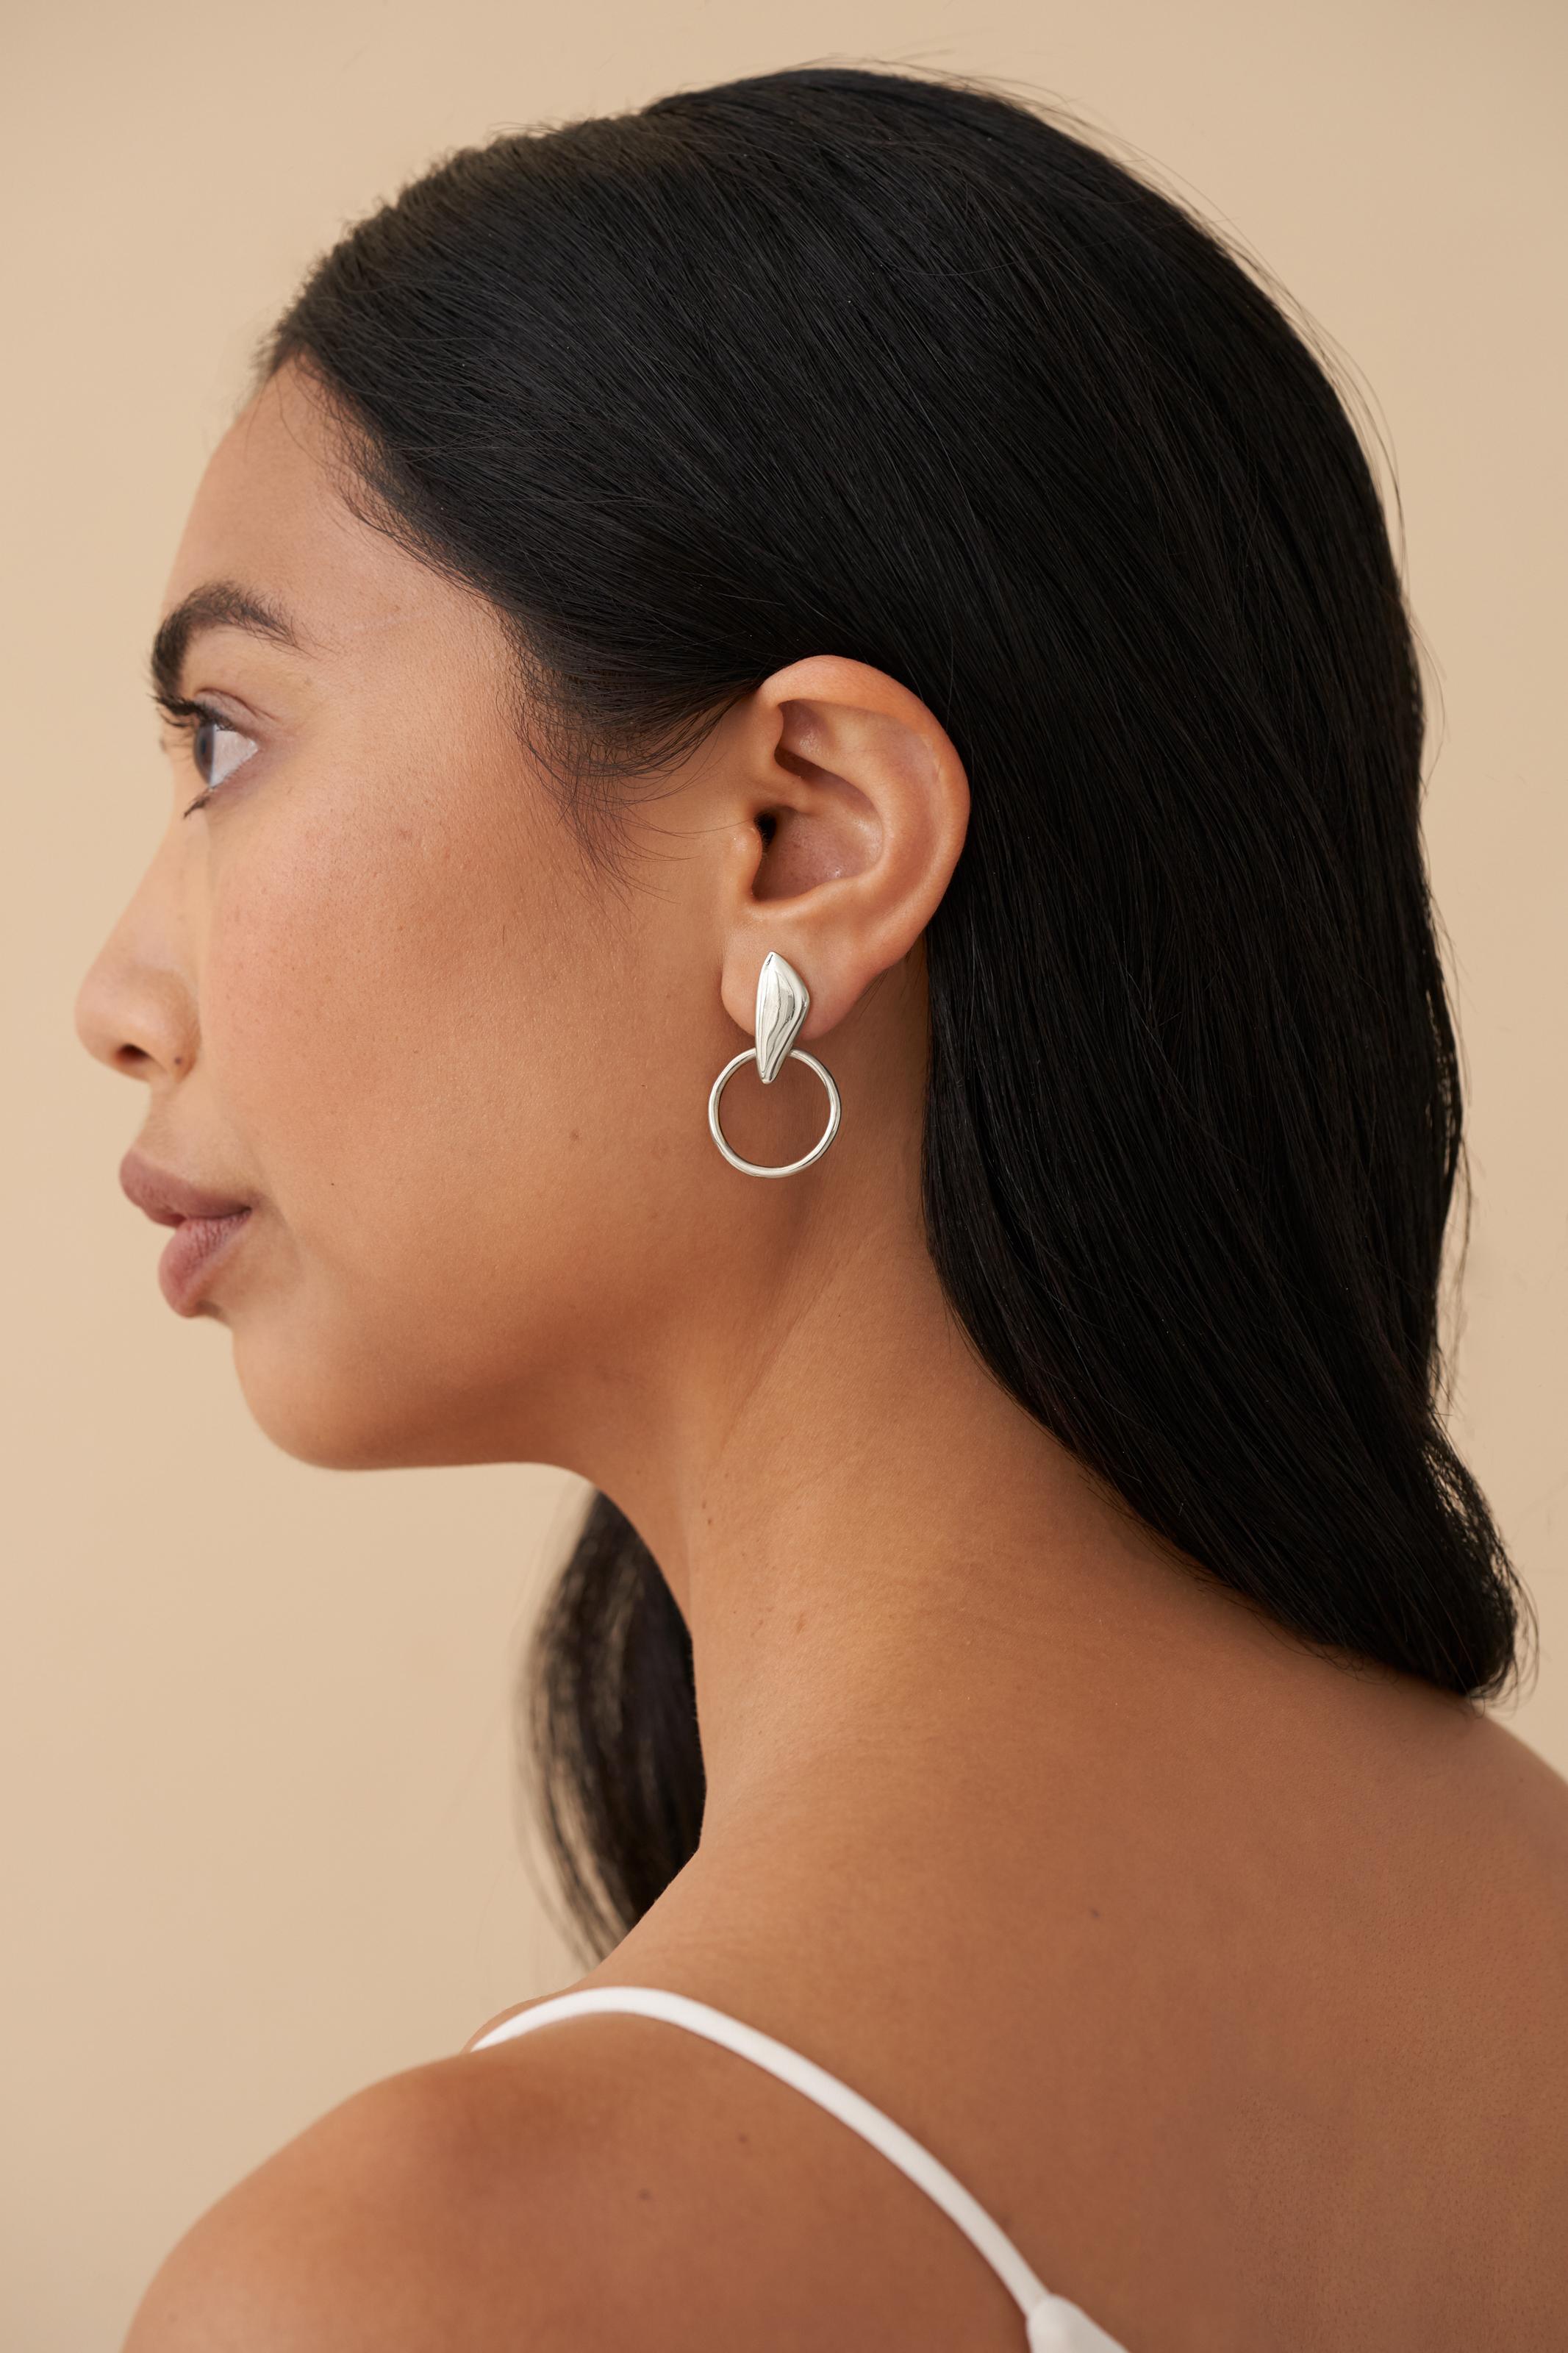 An update to the classic door knocker silhouette, these earrings are crafted from recycled sterling silver and designed with an artful petal-shaped silhouette. These versatile earrings will effortlessly upgrade any look.

Sterling silver posts and